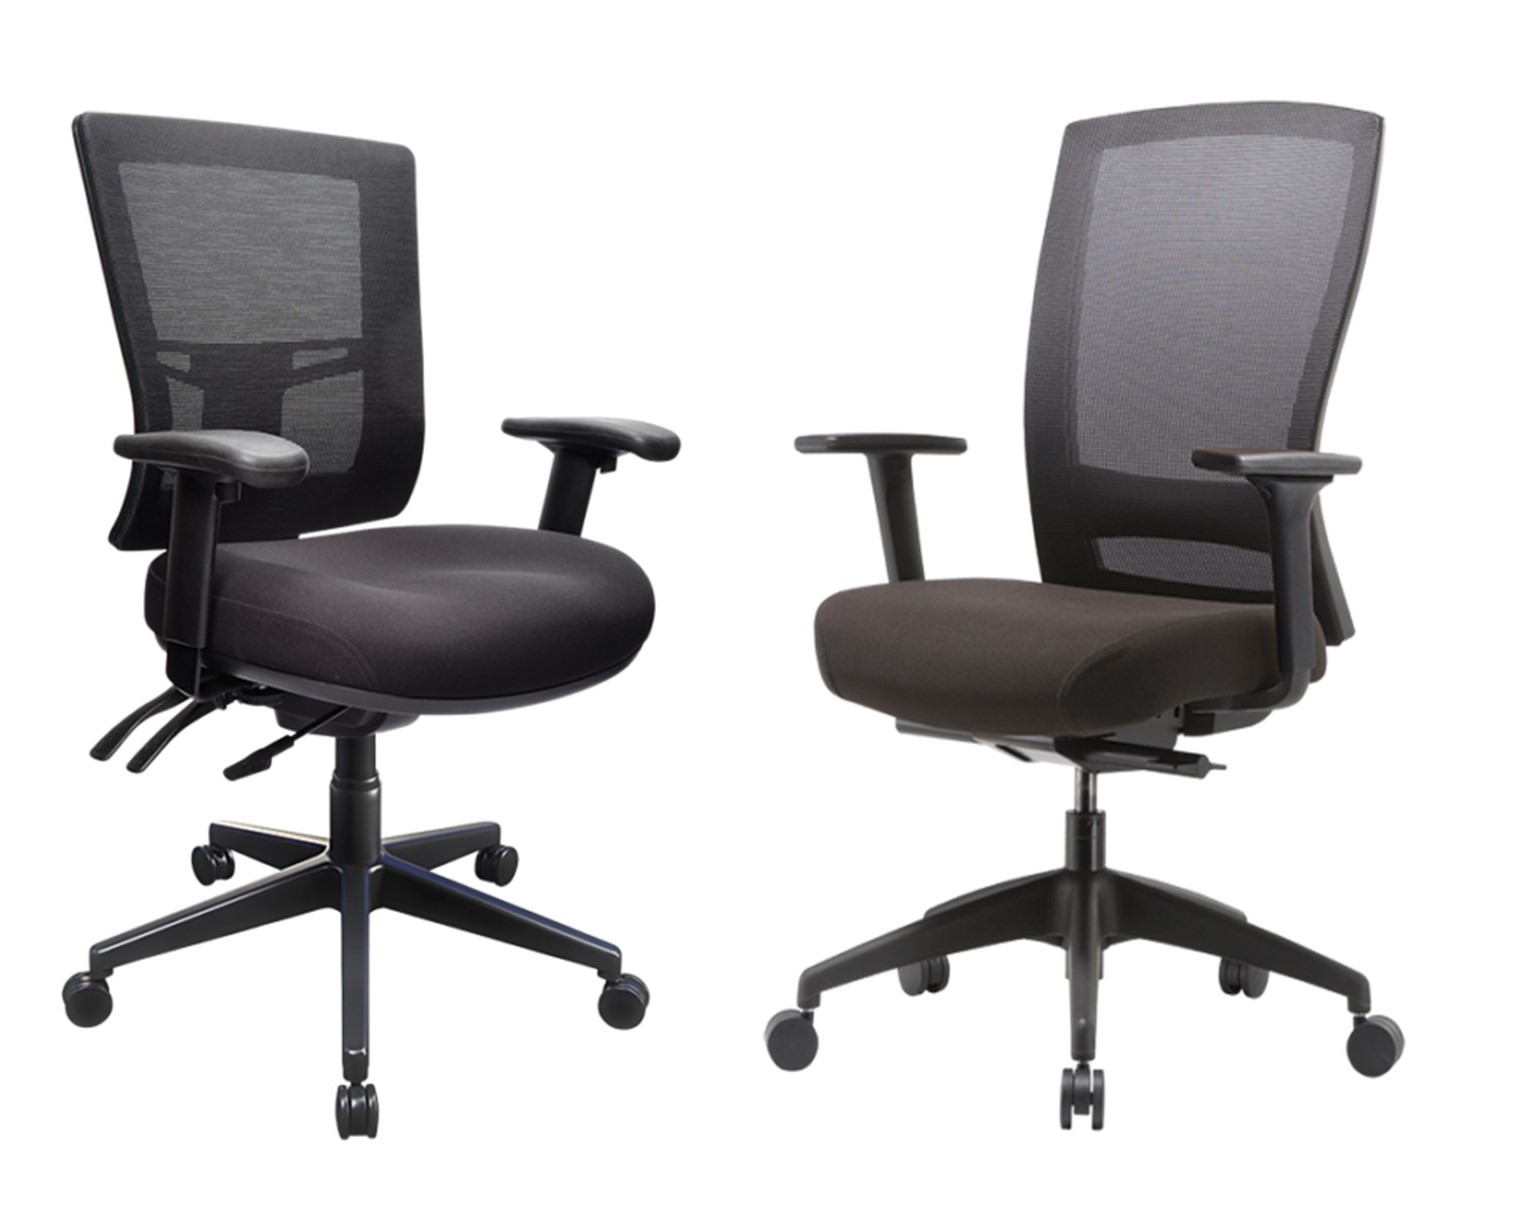 3-Lever Chairs vs Synchronised Chairs